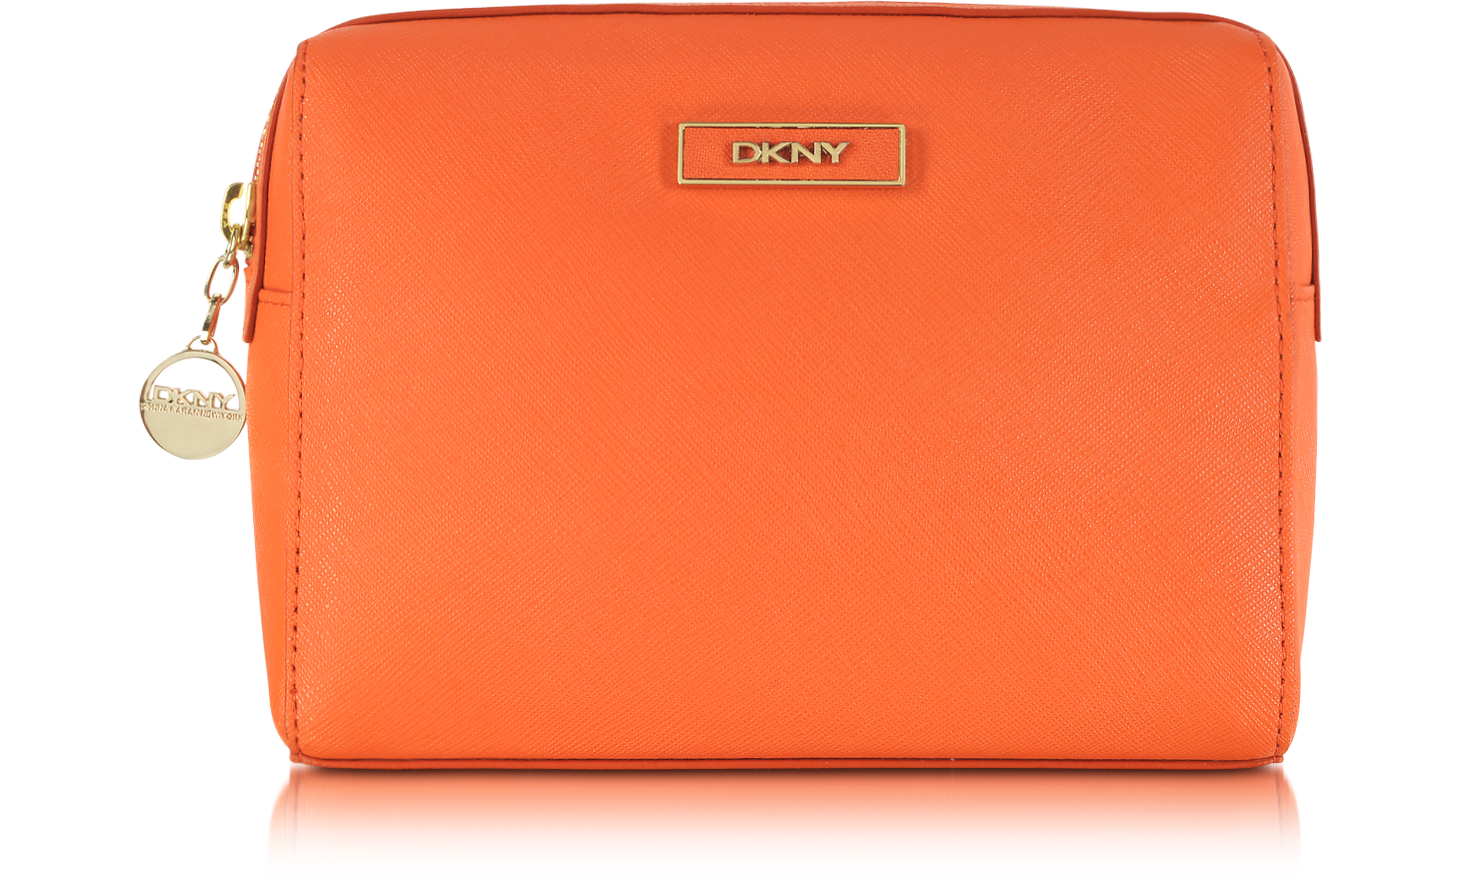 DKNY Orange Saffiano Leather Cosmetic Case at FORZIERI